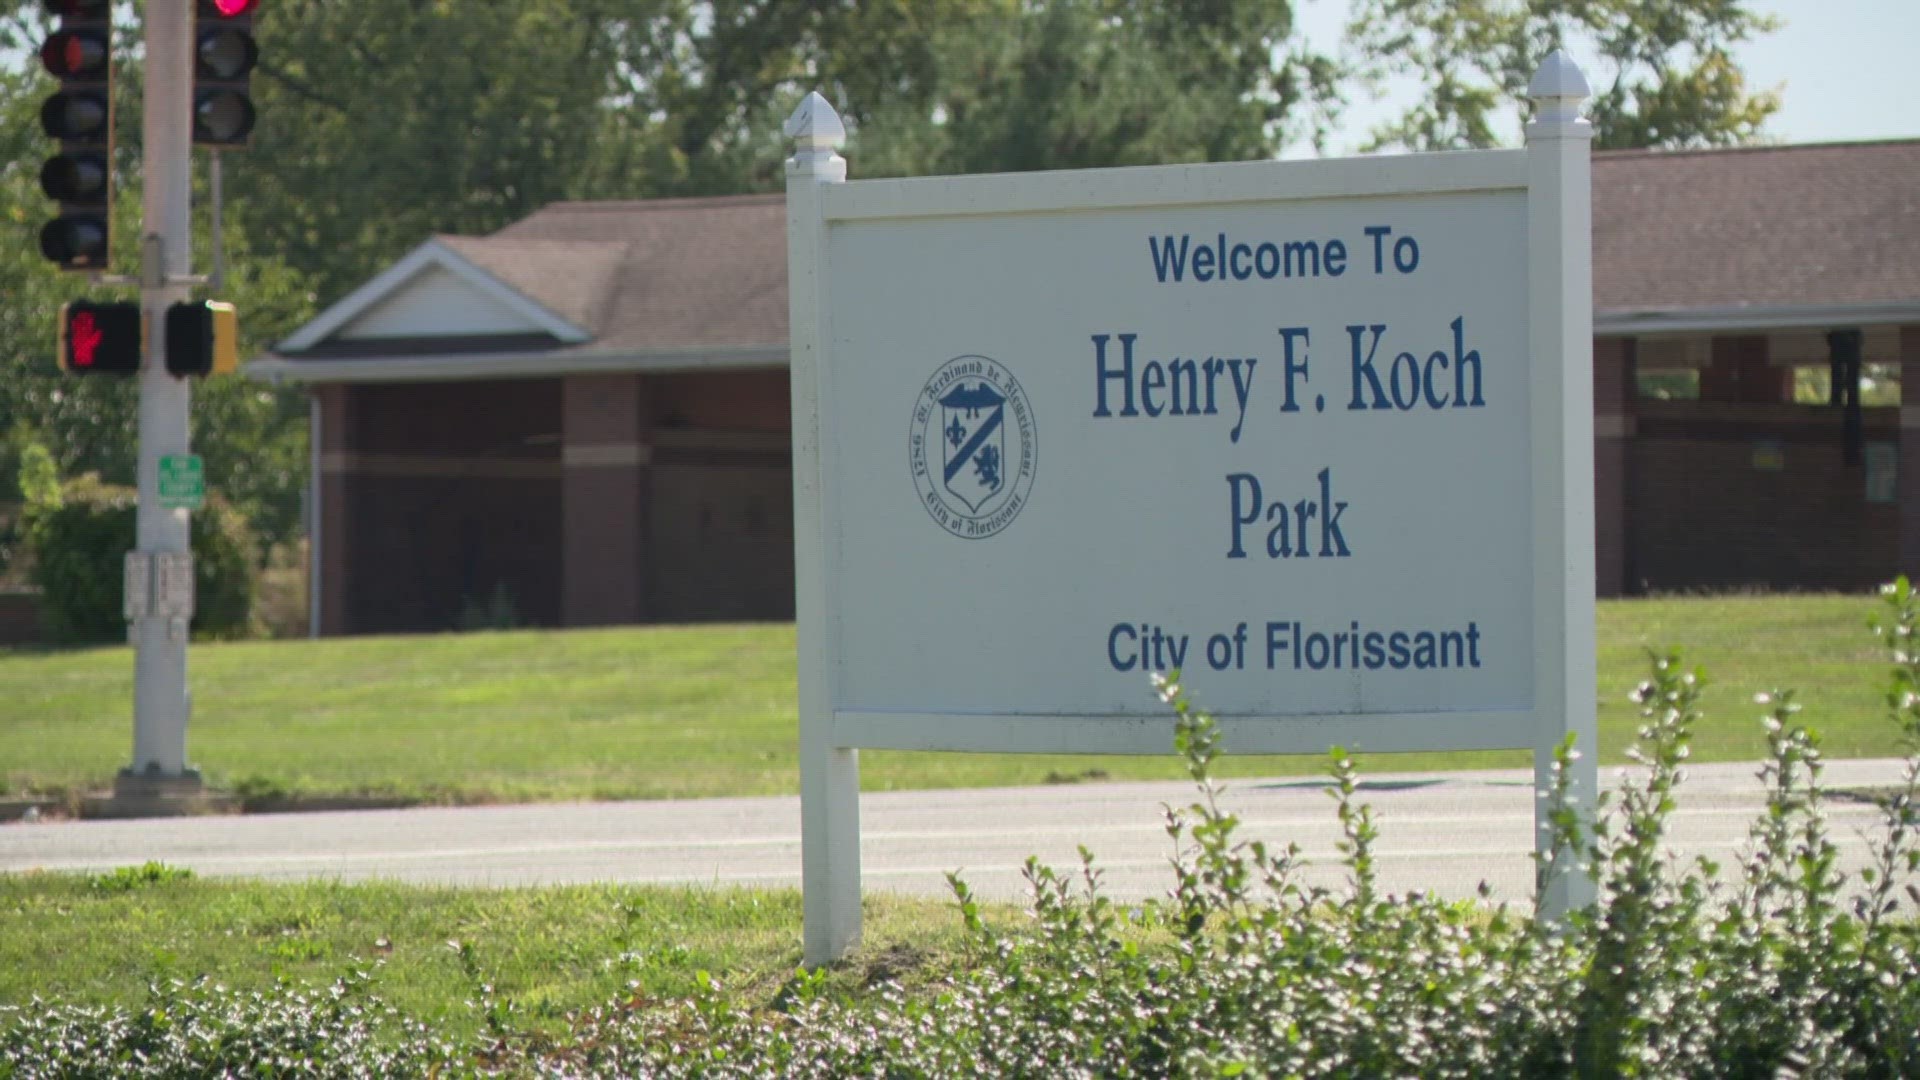 Florissant Mayor Timothy Lowery sees a plan to build homes in Koch Park as economic development. Some residents say it’s taking away greenspace.